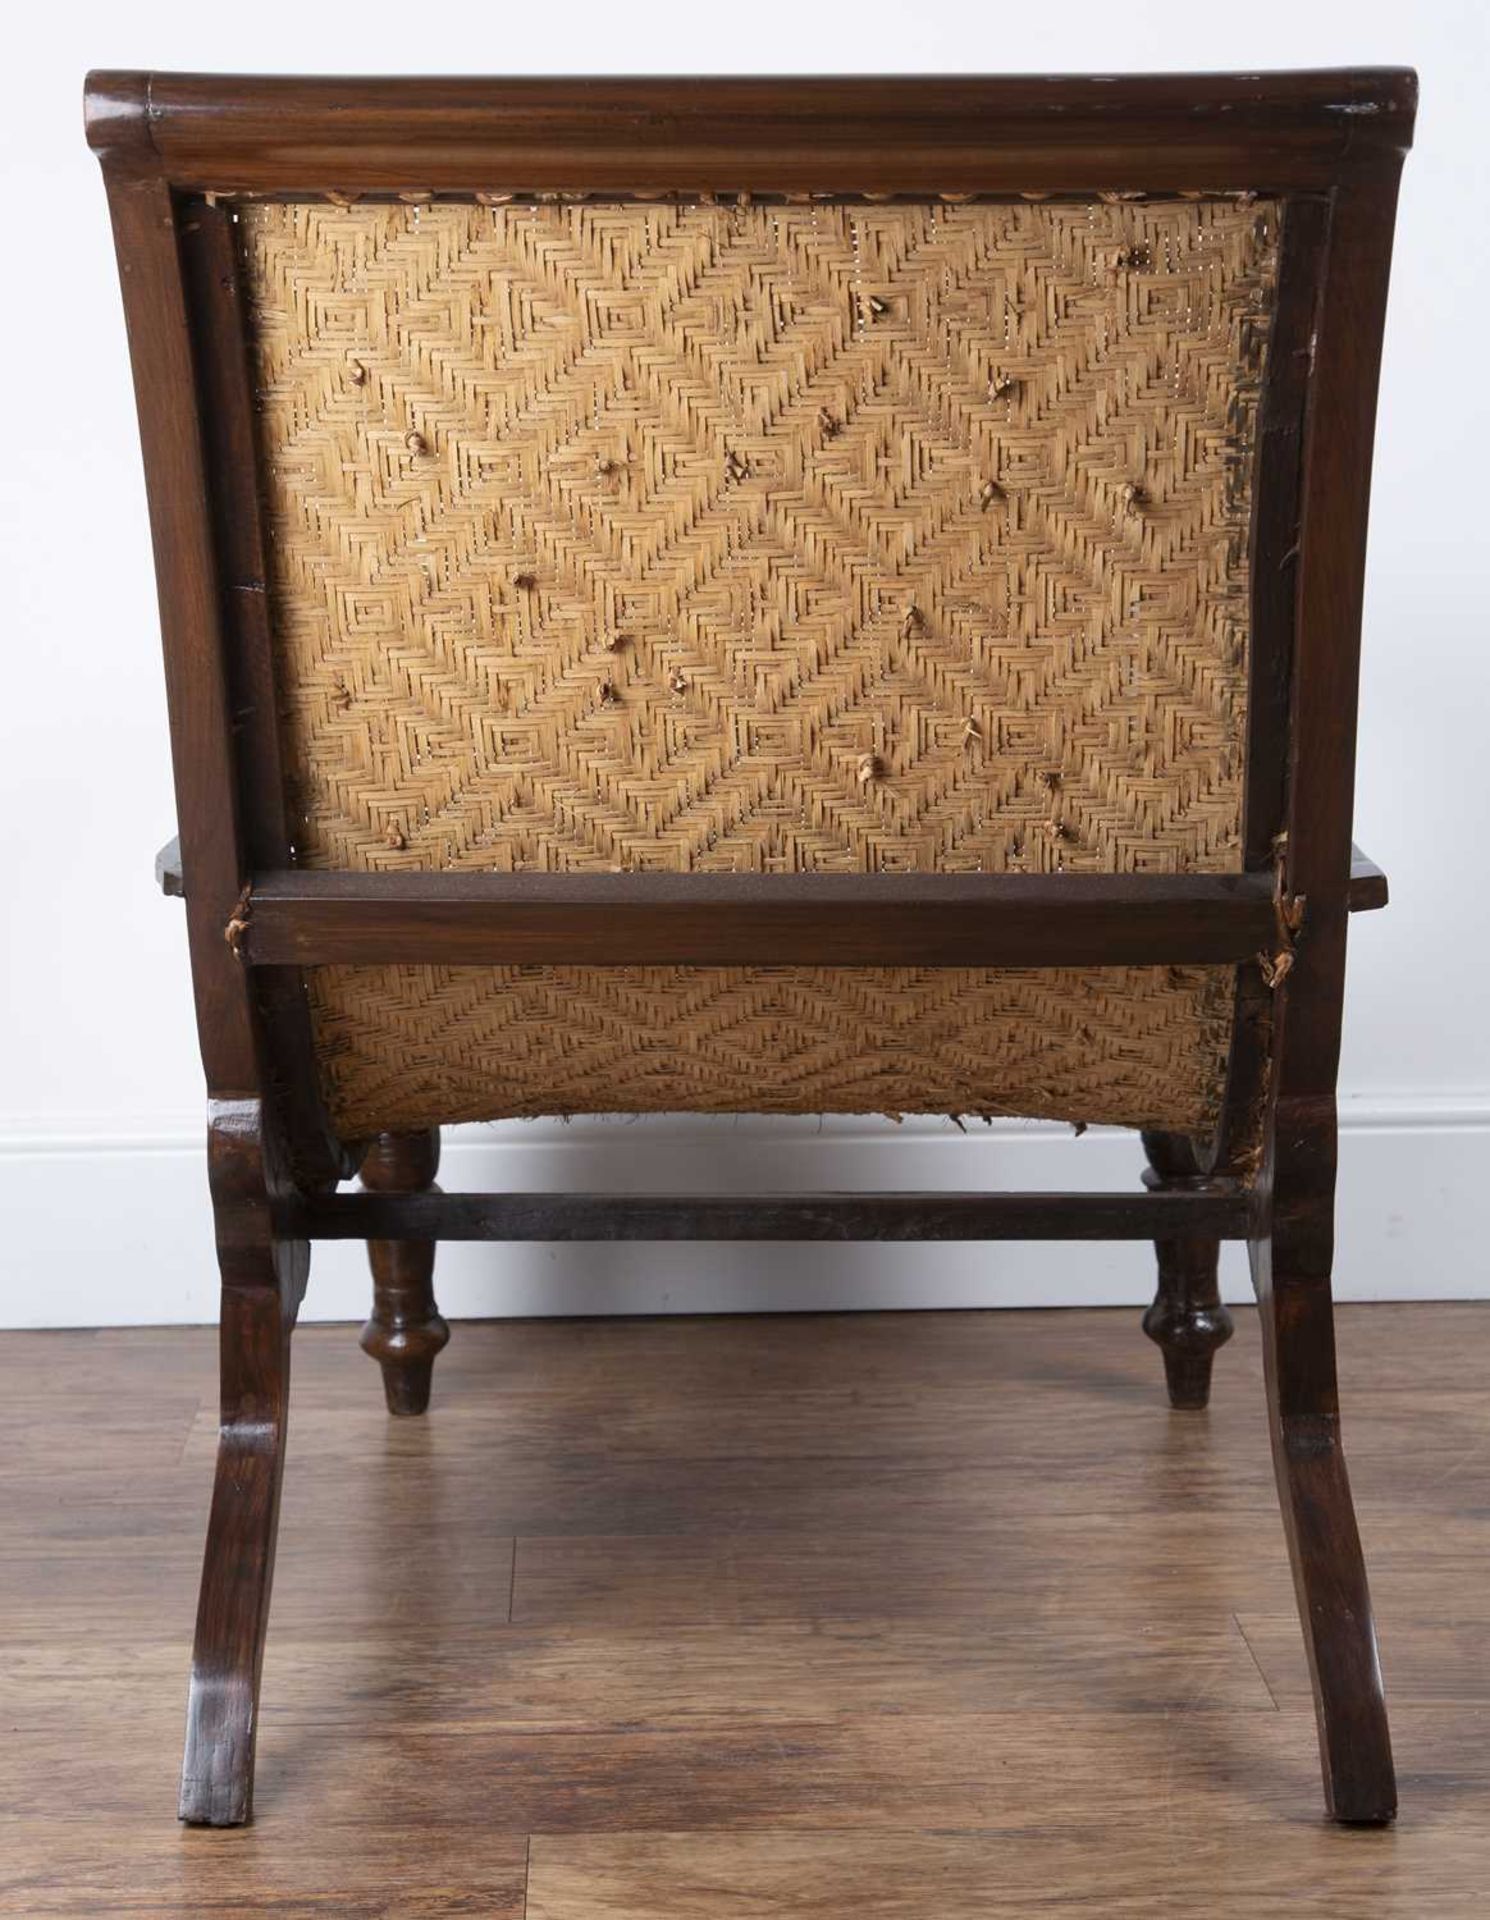 Plantation chair having a stained wood frame and woven rattan seat, 94cm high, 70cm wide overall x - Image 4 of 4